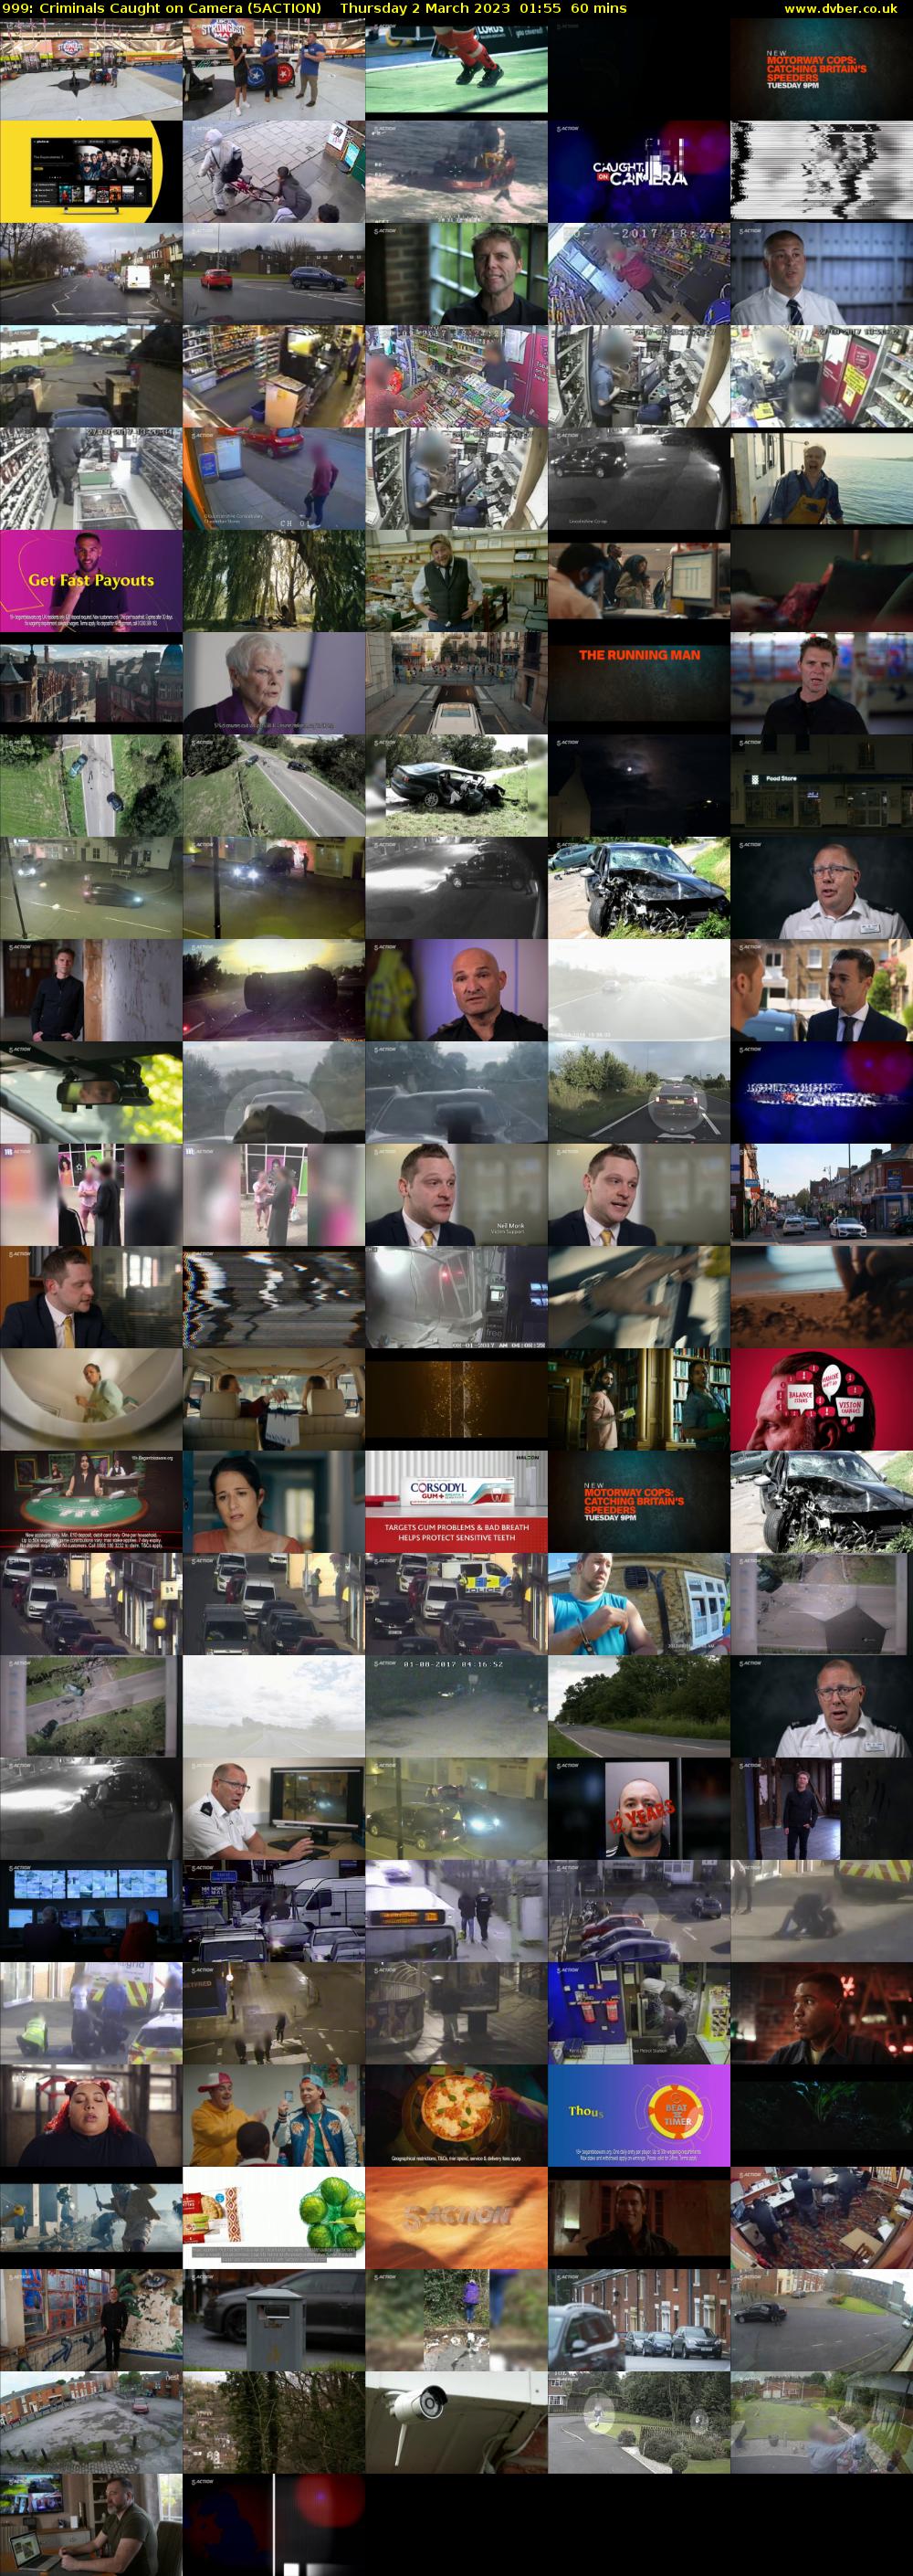 999: Criminals Caught on Camera (5ACTION) Thursday 2 March 2023 01:55 - 02:55